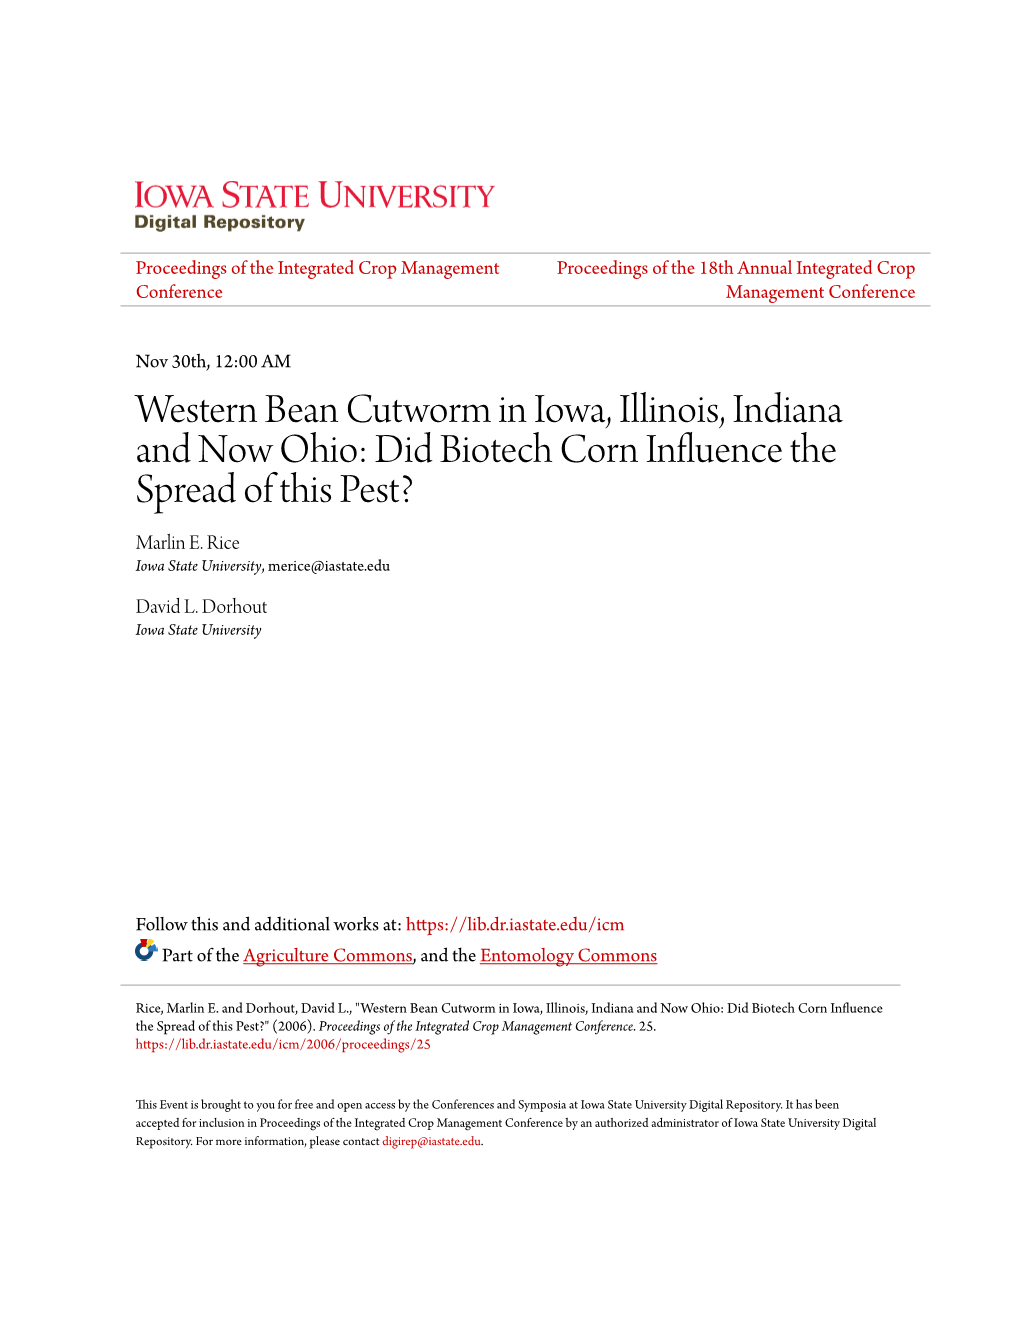 Western Bean Cutworm in Iowa, Illinois, Indiana and Now Ohio: Did Biotech Corn Influence the Spread of This Pest? Marlin E